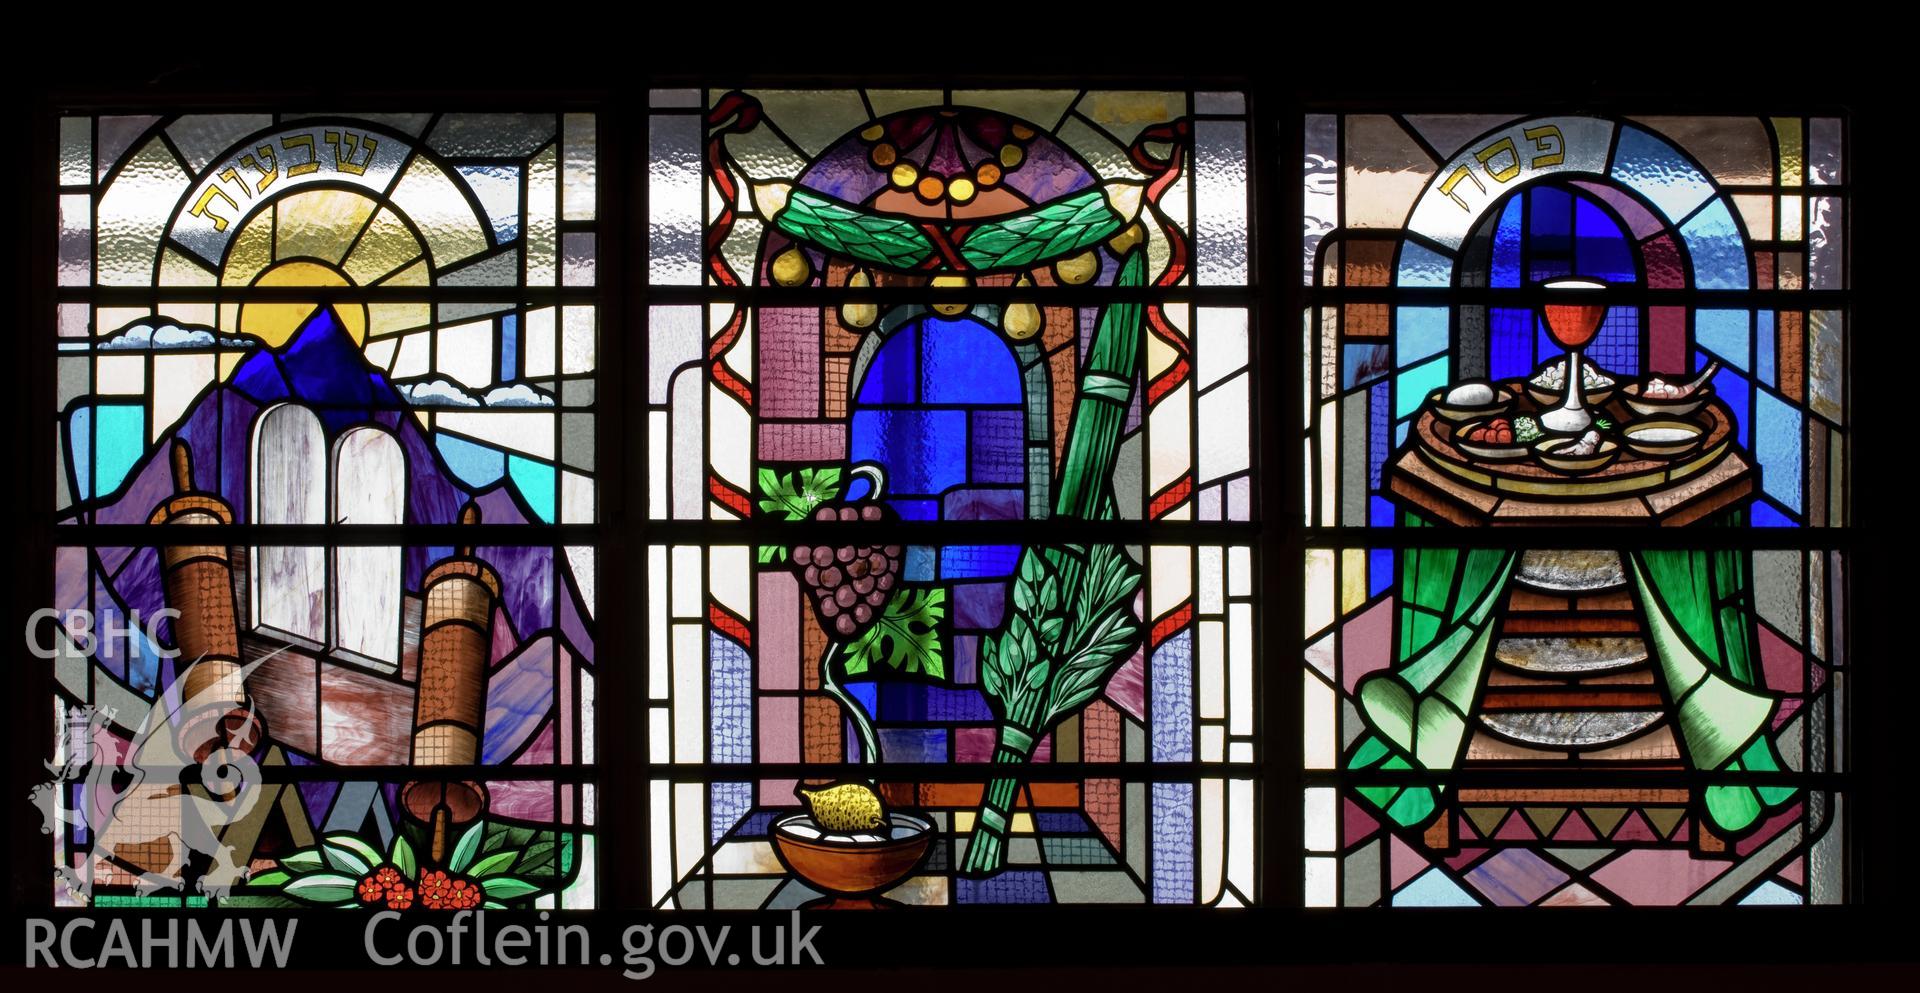 Stained glass window in east wall.